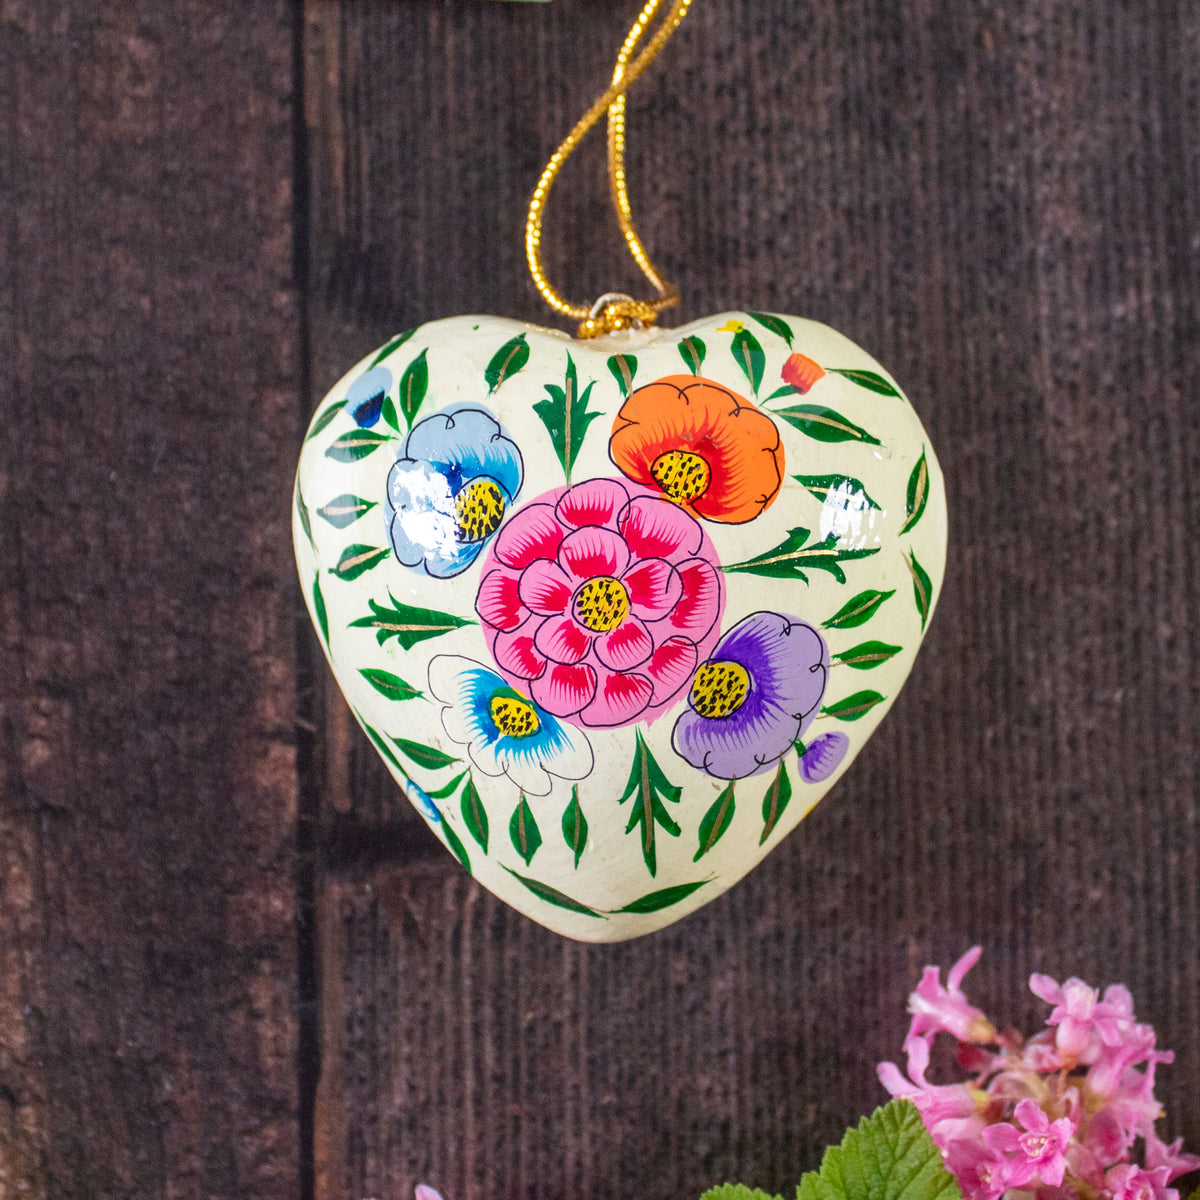 Hanging Spring Decoration - Painted Heart - Cream Flowers